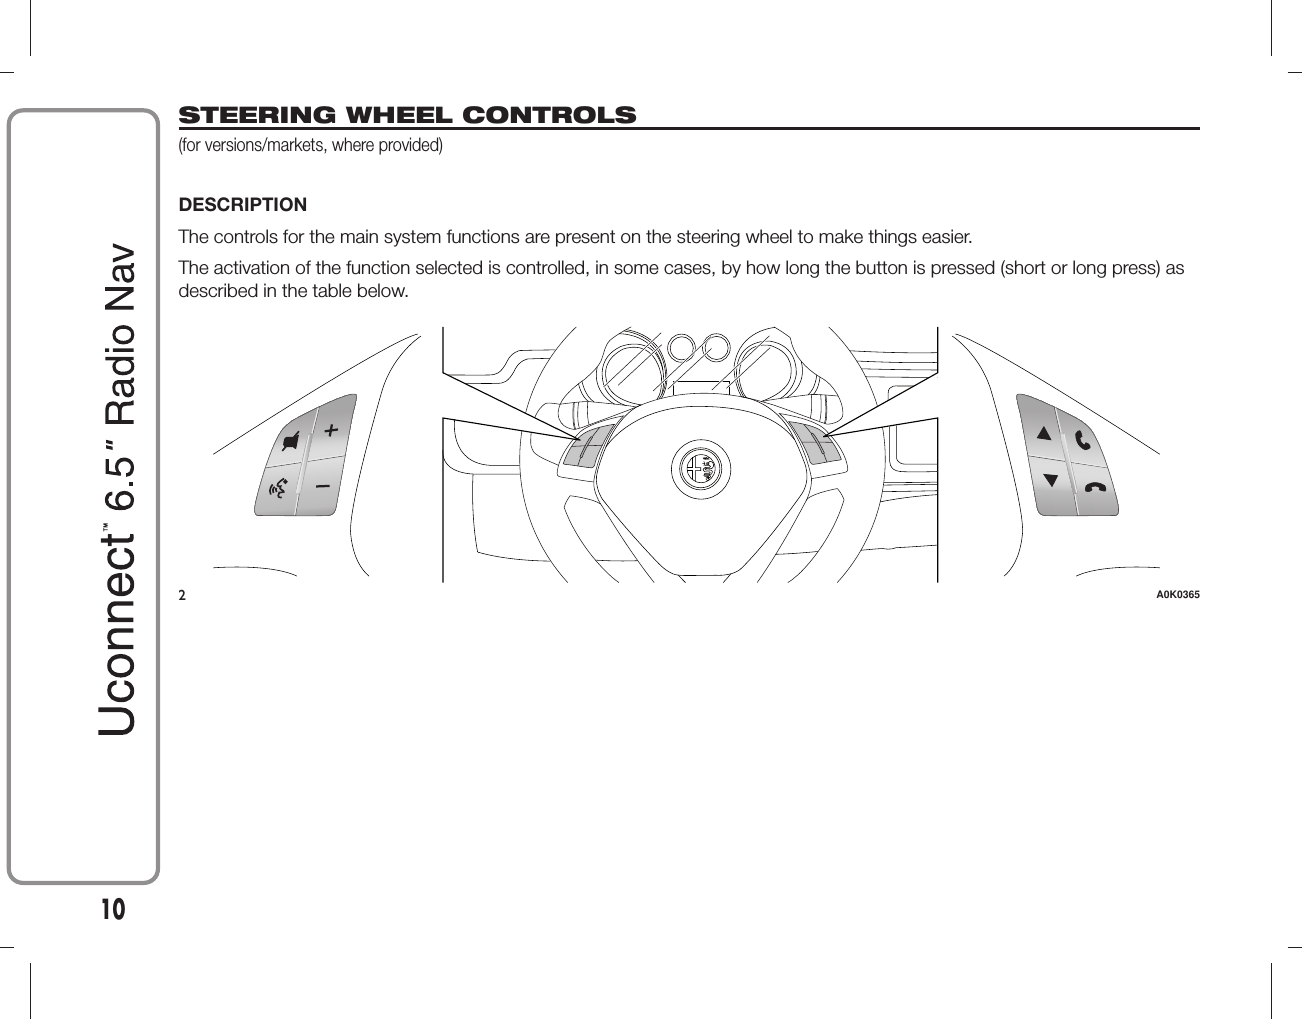 STEERING WHEEL CONTROLS(for versions/markets, where provided)DESCRIPTIONThe controls for the main system functions are present on the steering wheel to make things easier.The activation of the function selected is controlled, in some cases, by how long the button is pressed (short or long press) asdescribed in the table below.2A0K036510